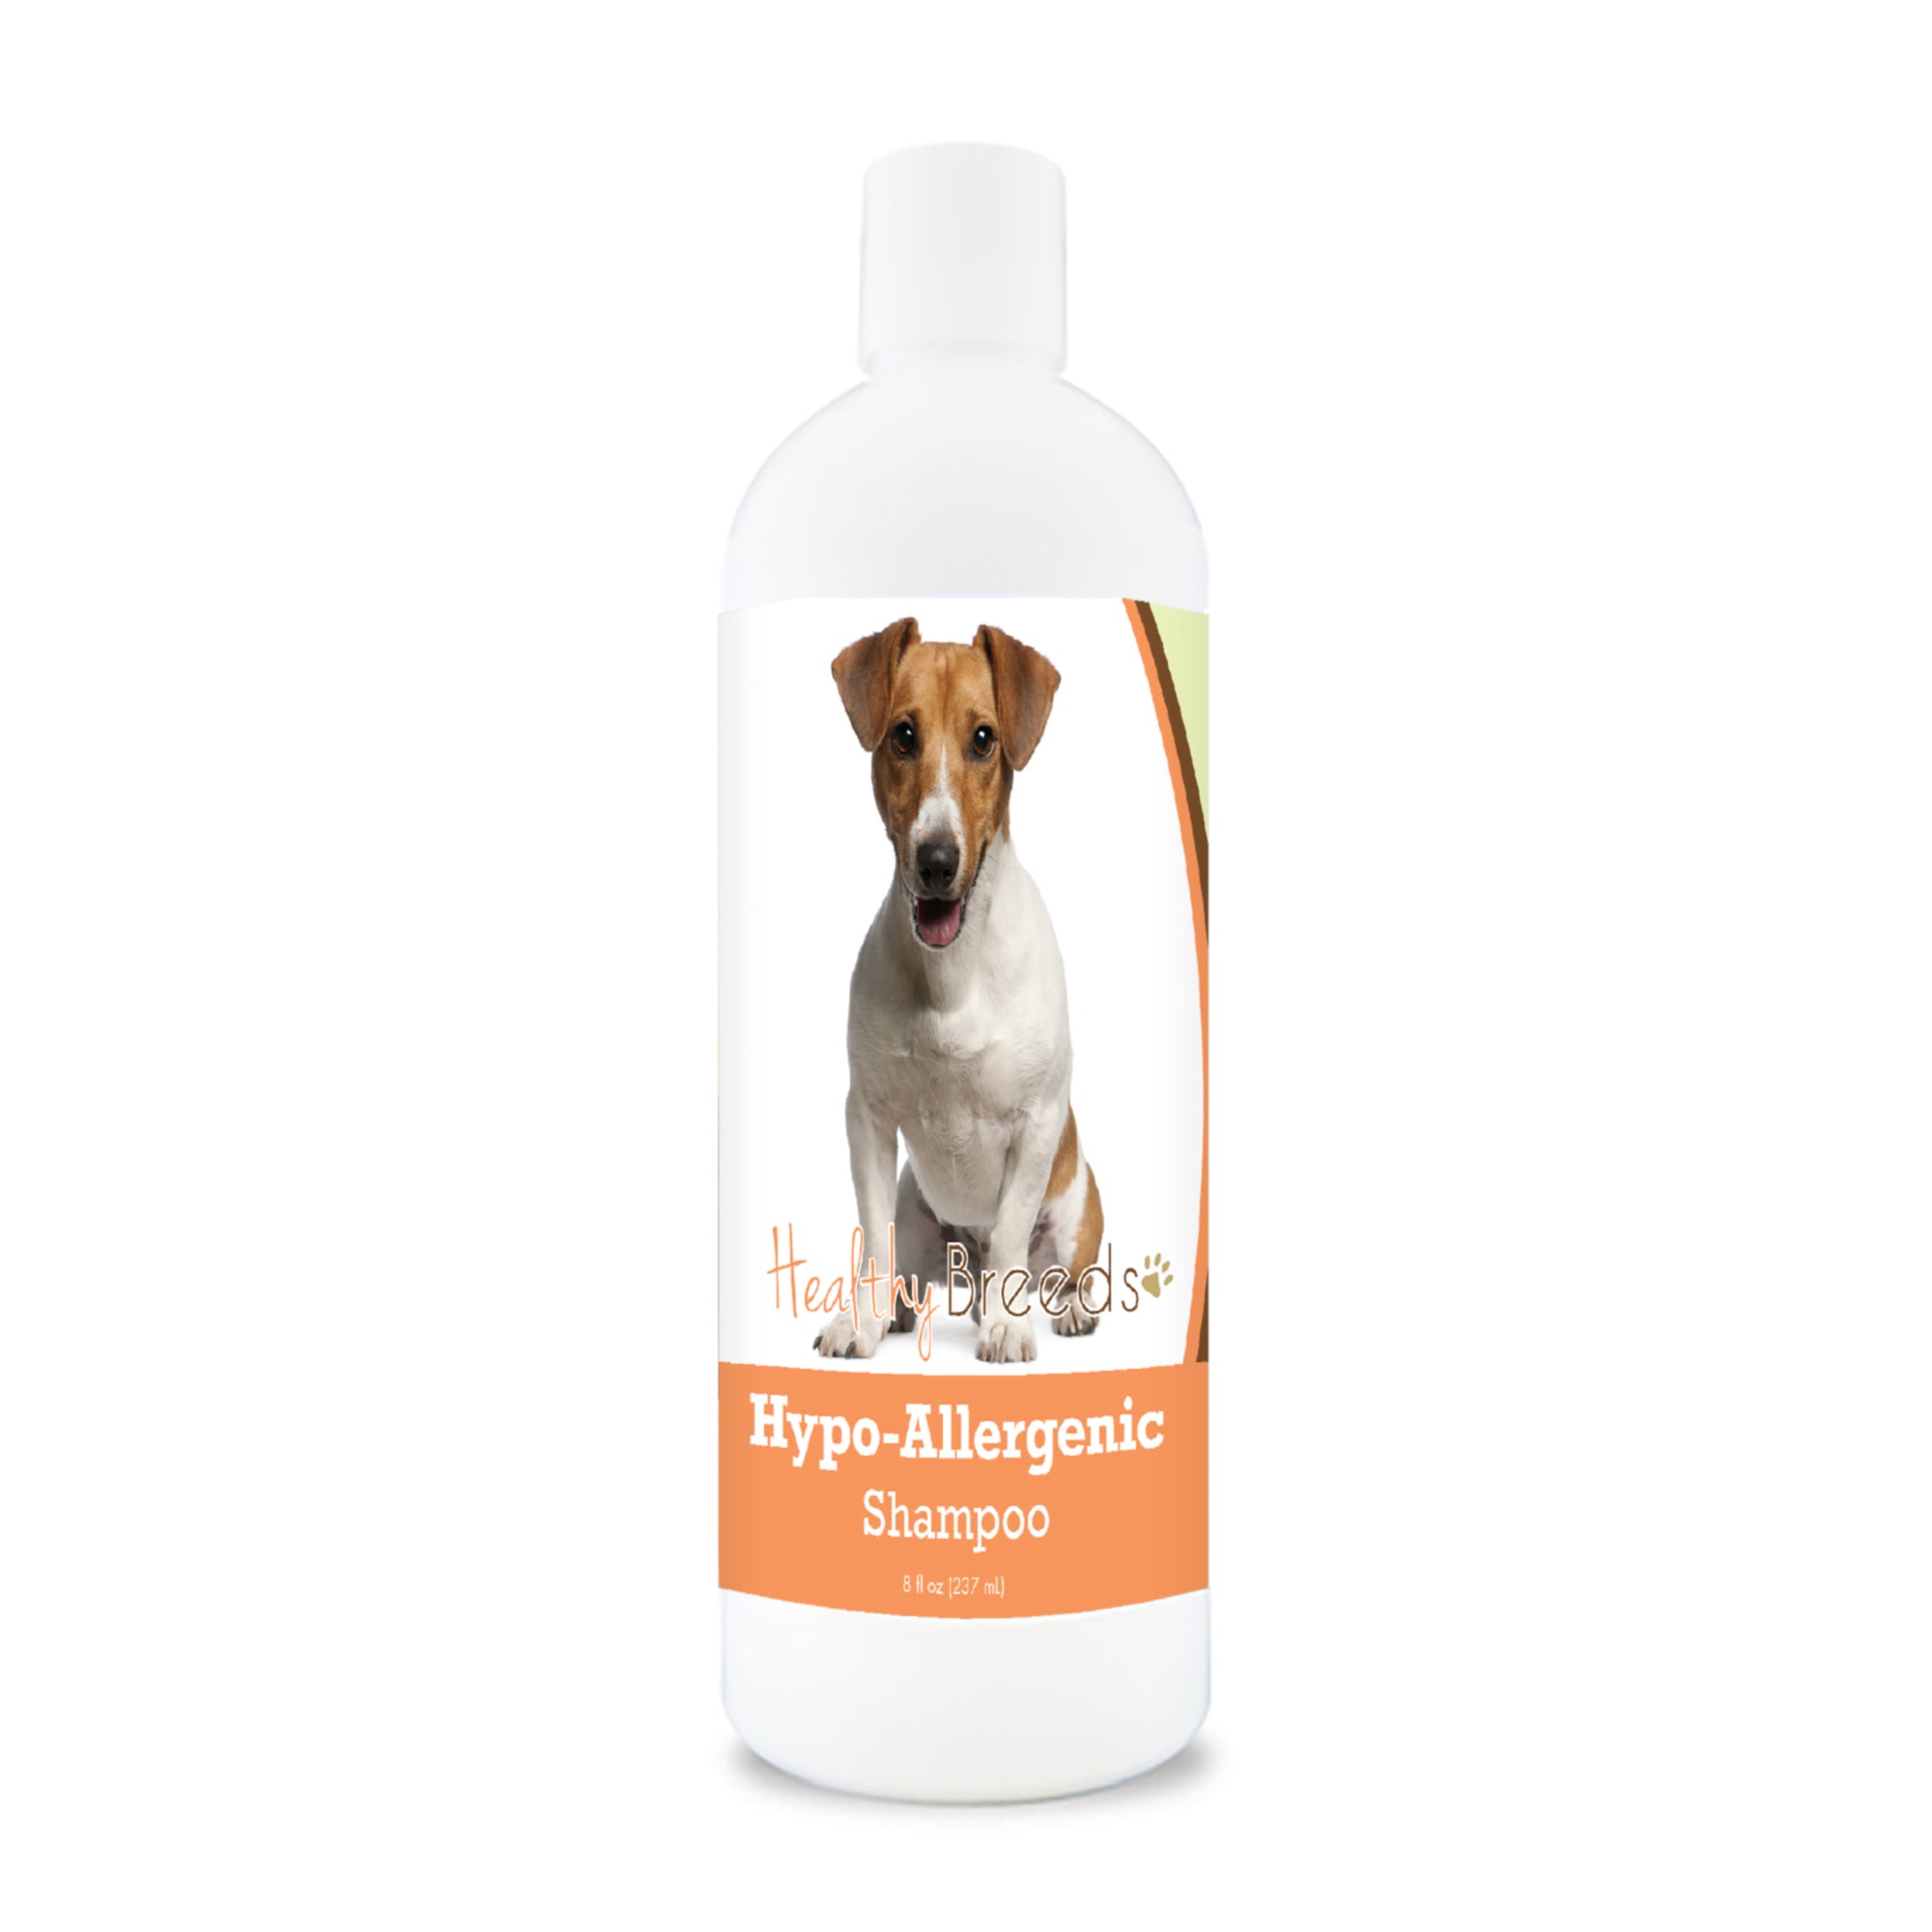 Jack Russell Terrier Hypo-Allergenic Shampoo 8 oz